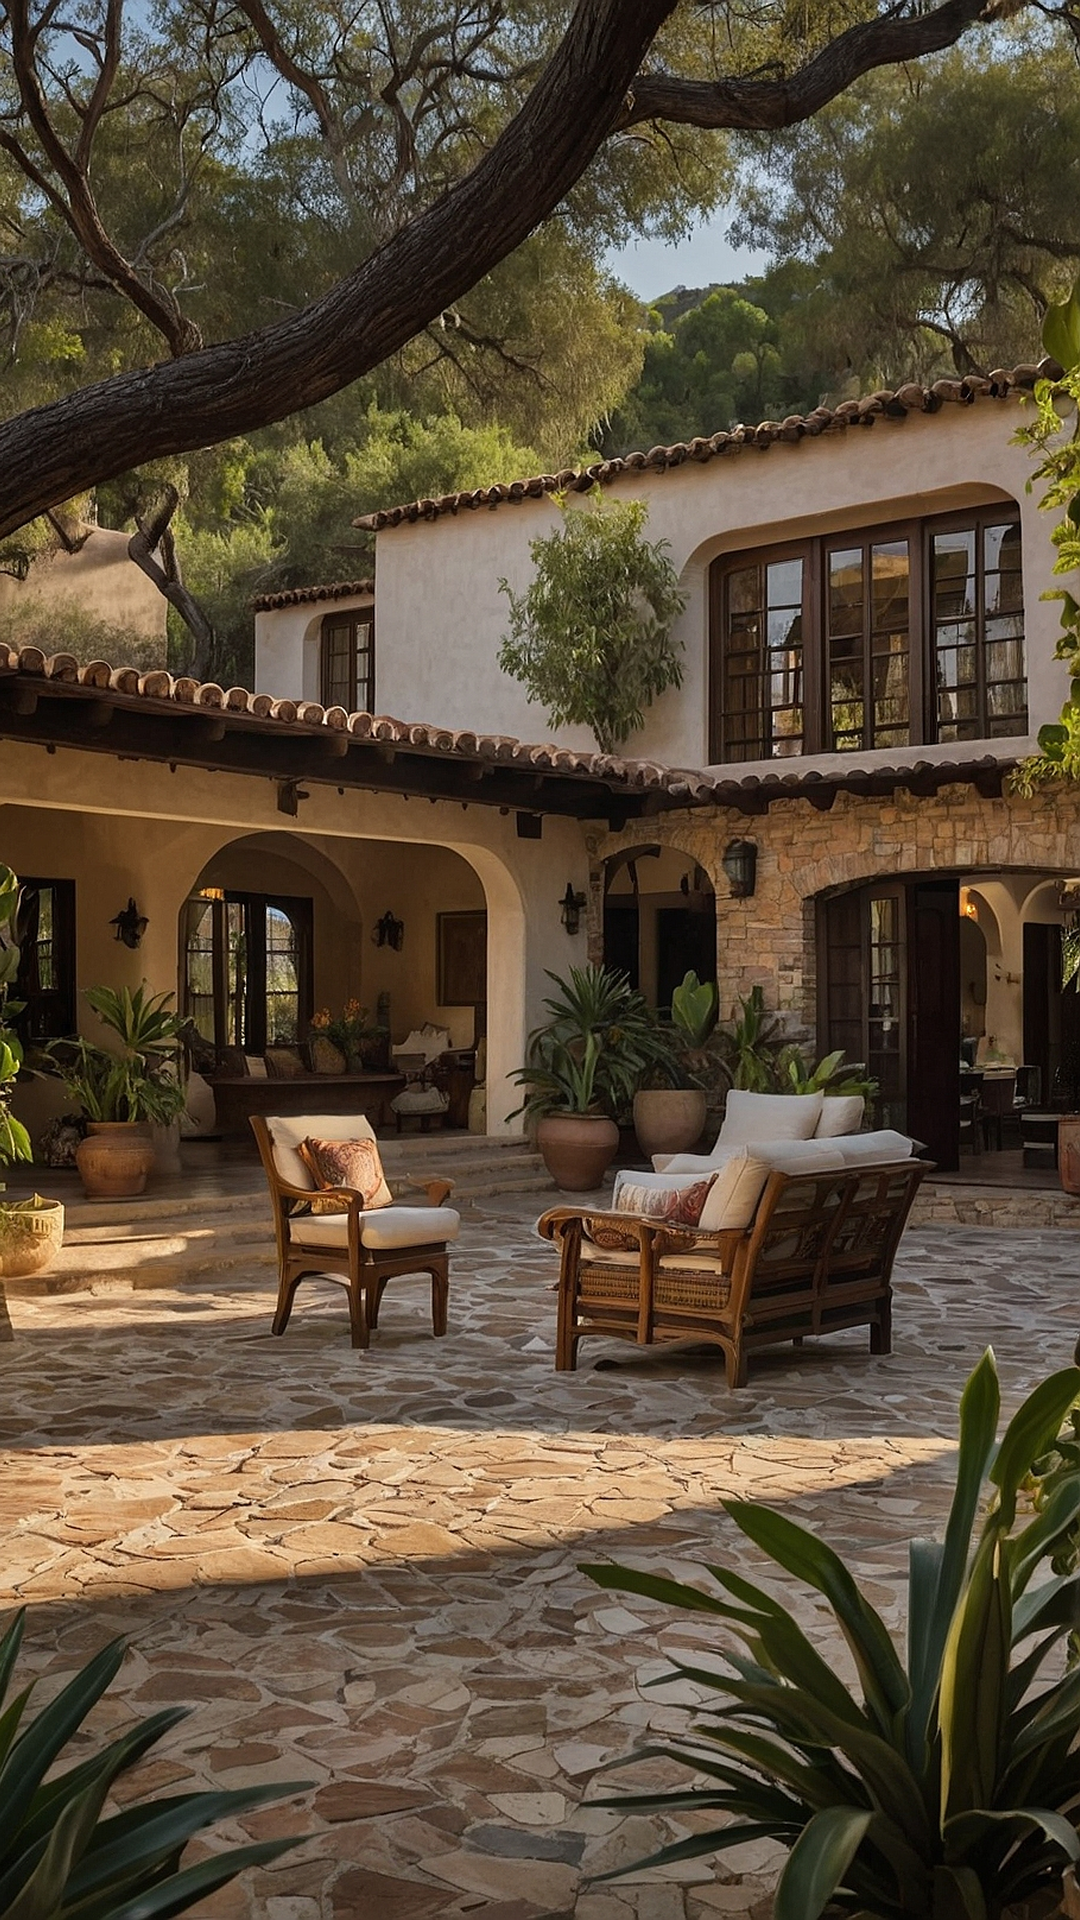 From Old World to New: Hacienda Transformations